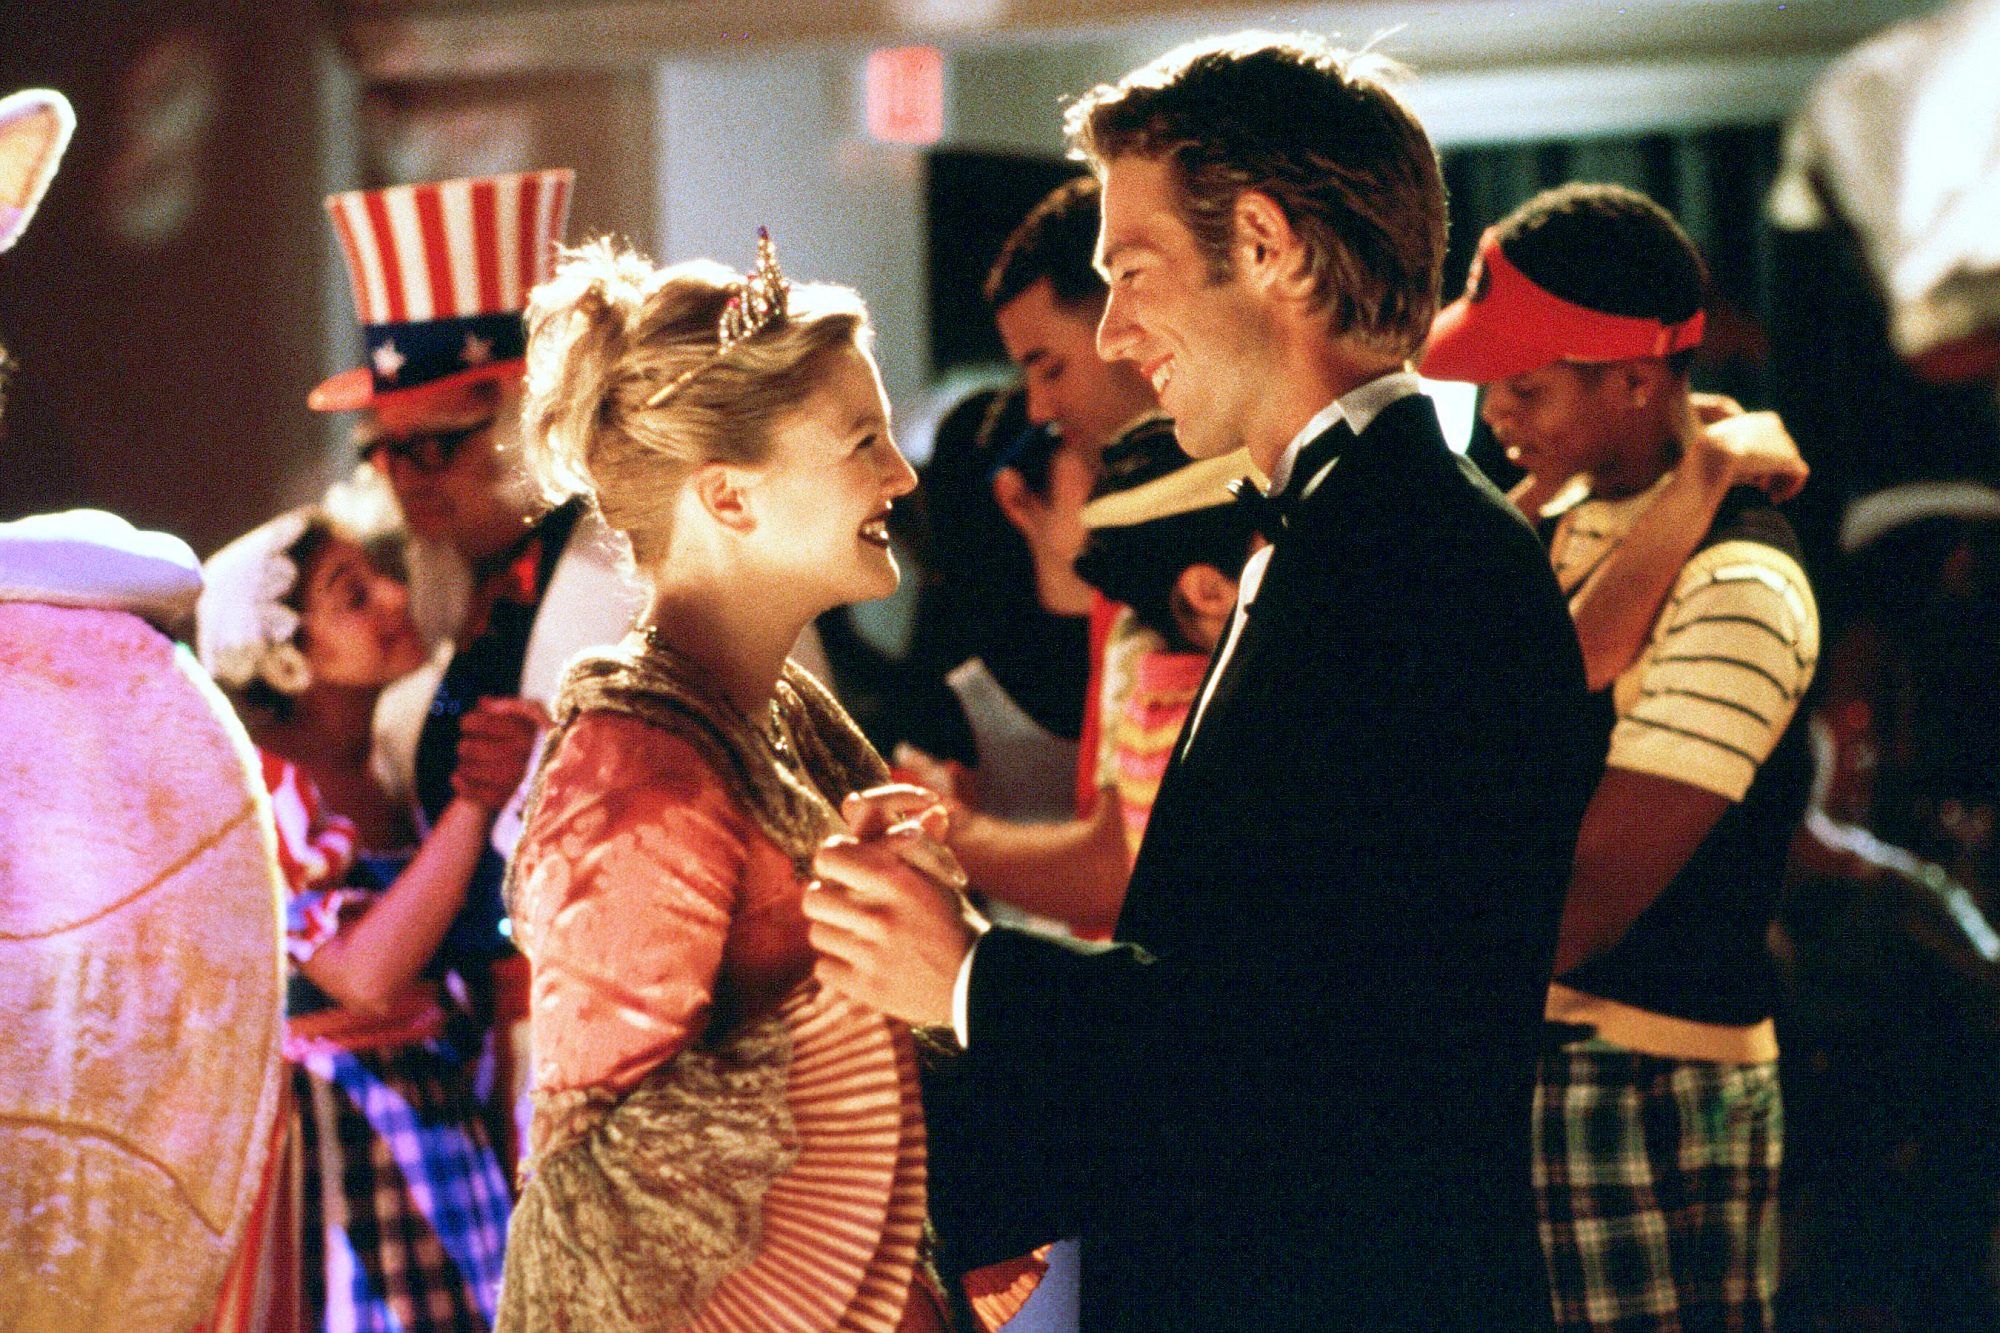 Drew Barrymore Never Been Kissed